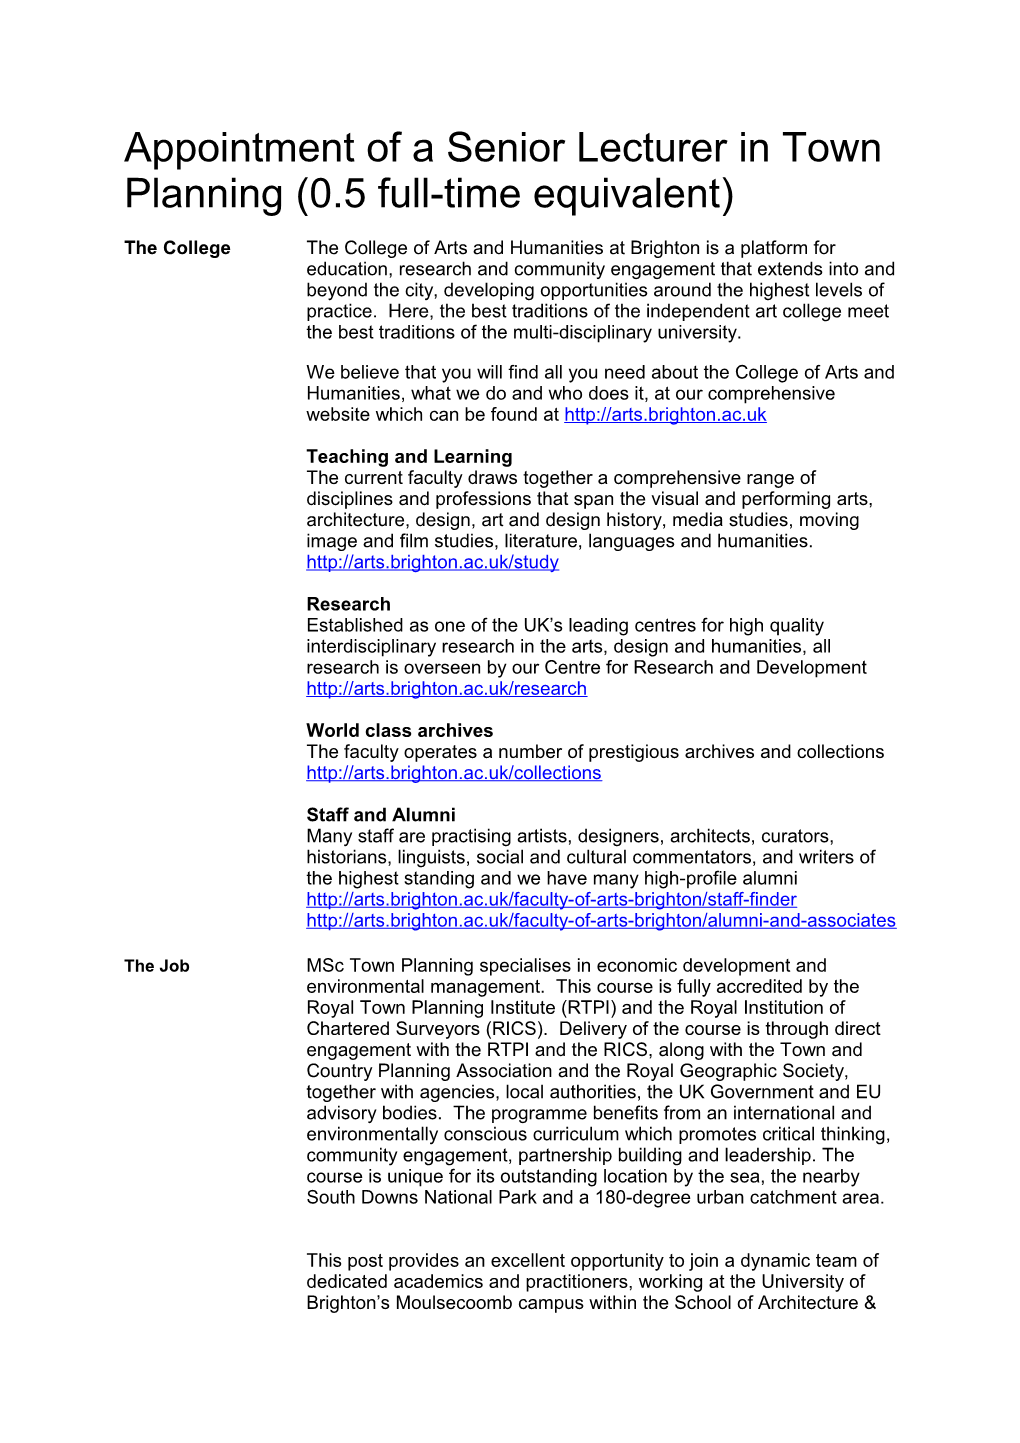 Appointment of a Senior Lecturer in Town Planning (0.5 Full-Time Equivalent)